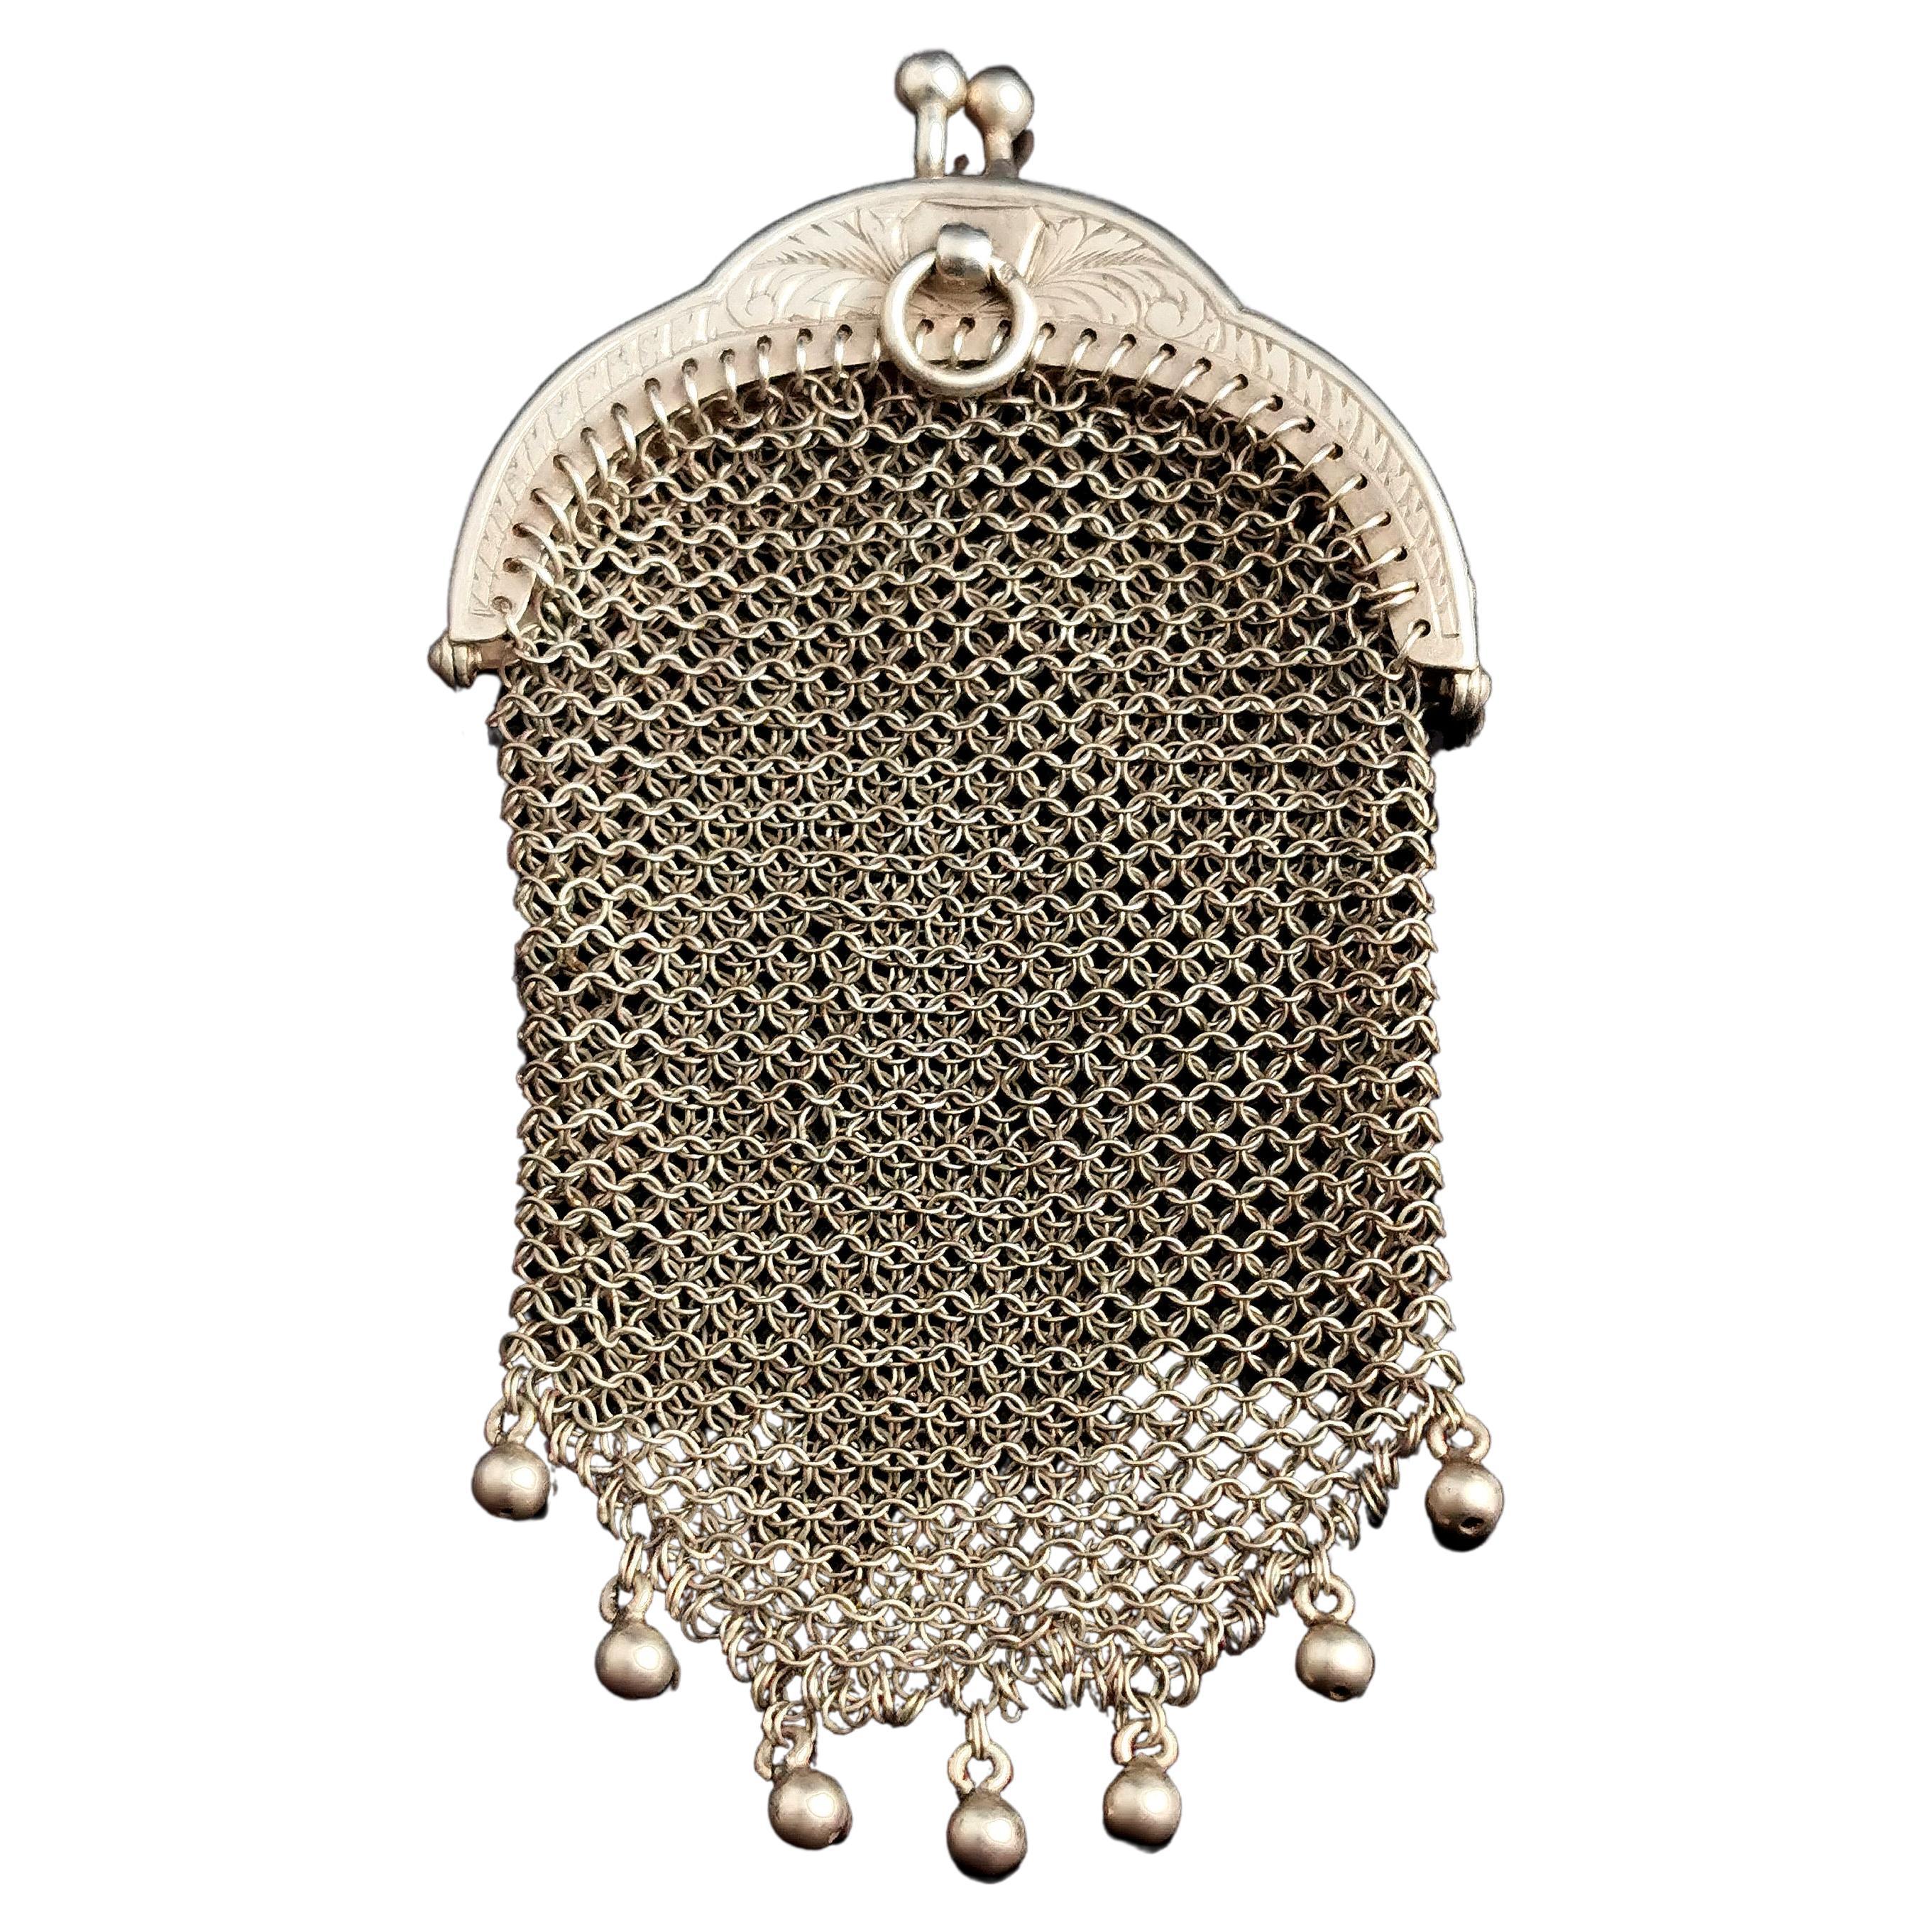 Sterling silver mesh purse with Scottie dog finial, 26.4 grams, 11.5 cm |  Russell Kaplan Auctioneers